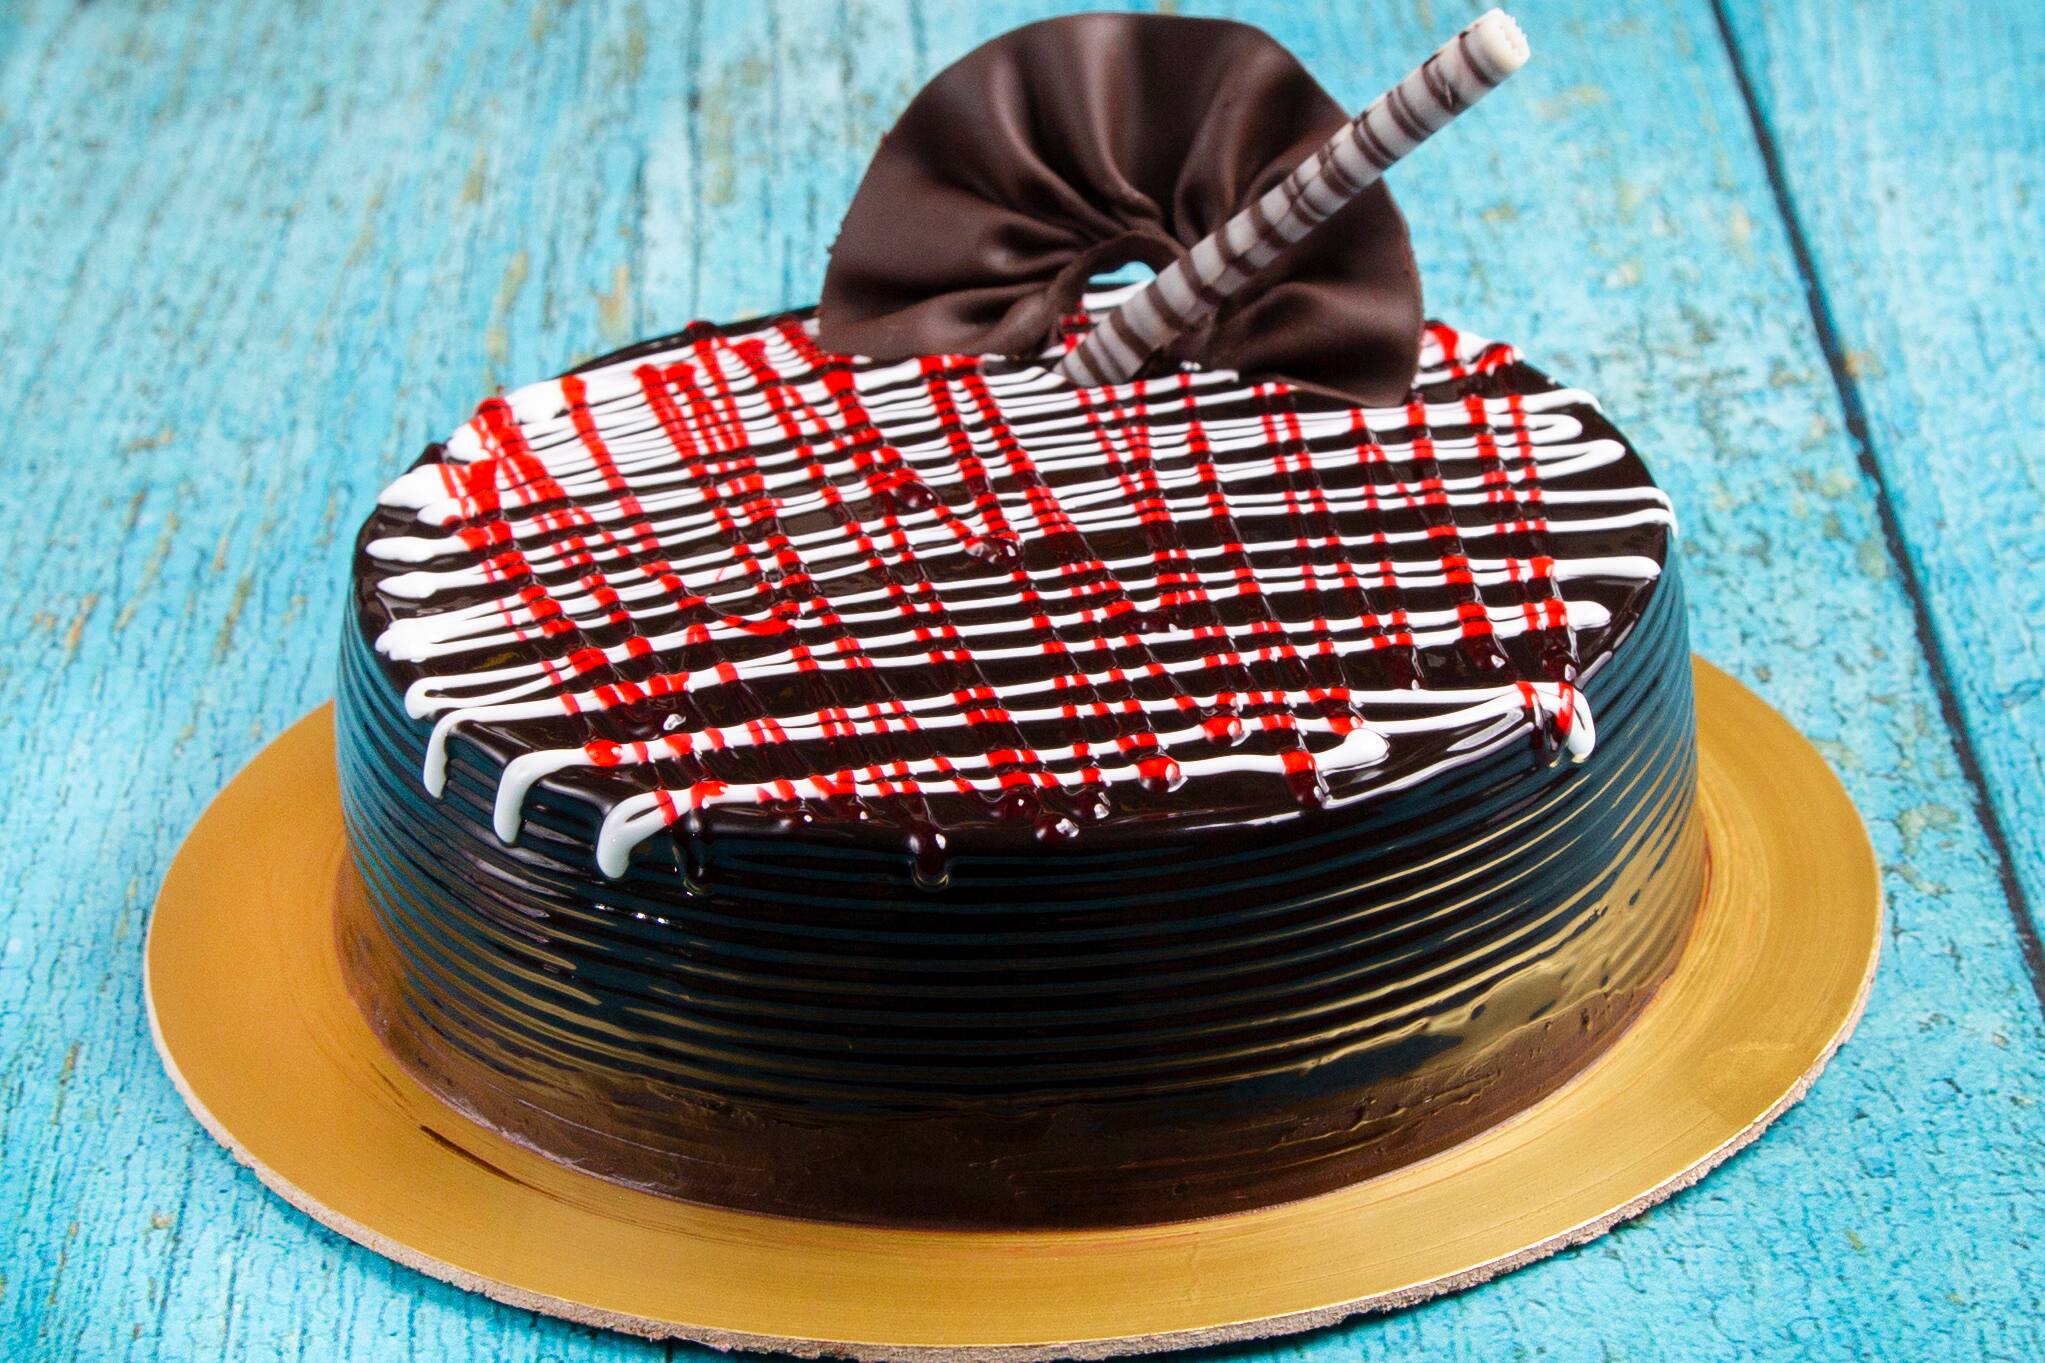 Any Flavour 500gm #Normal_CAKE Just Rs.199/- | 500gm #PHOTO_CAKE Just  Rs.249/- | 1kg #PHOTO_CAKE Just Rs.499/- Online Order By #Zo… | Cake, Cake  shop, Special cake